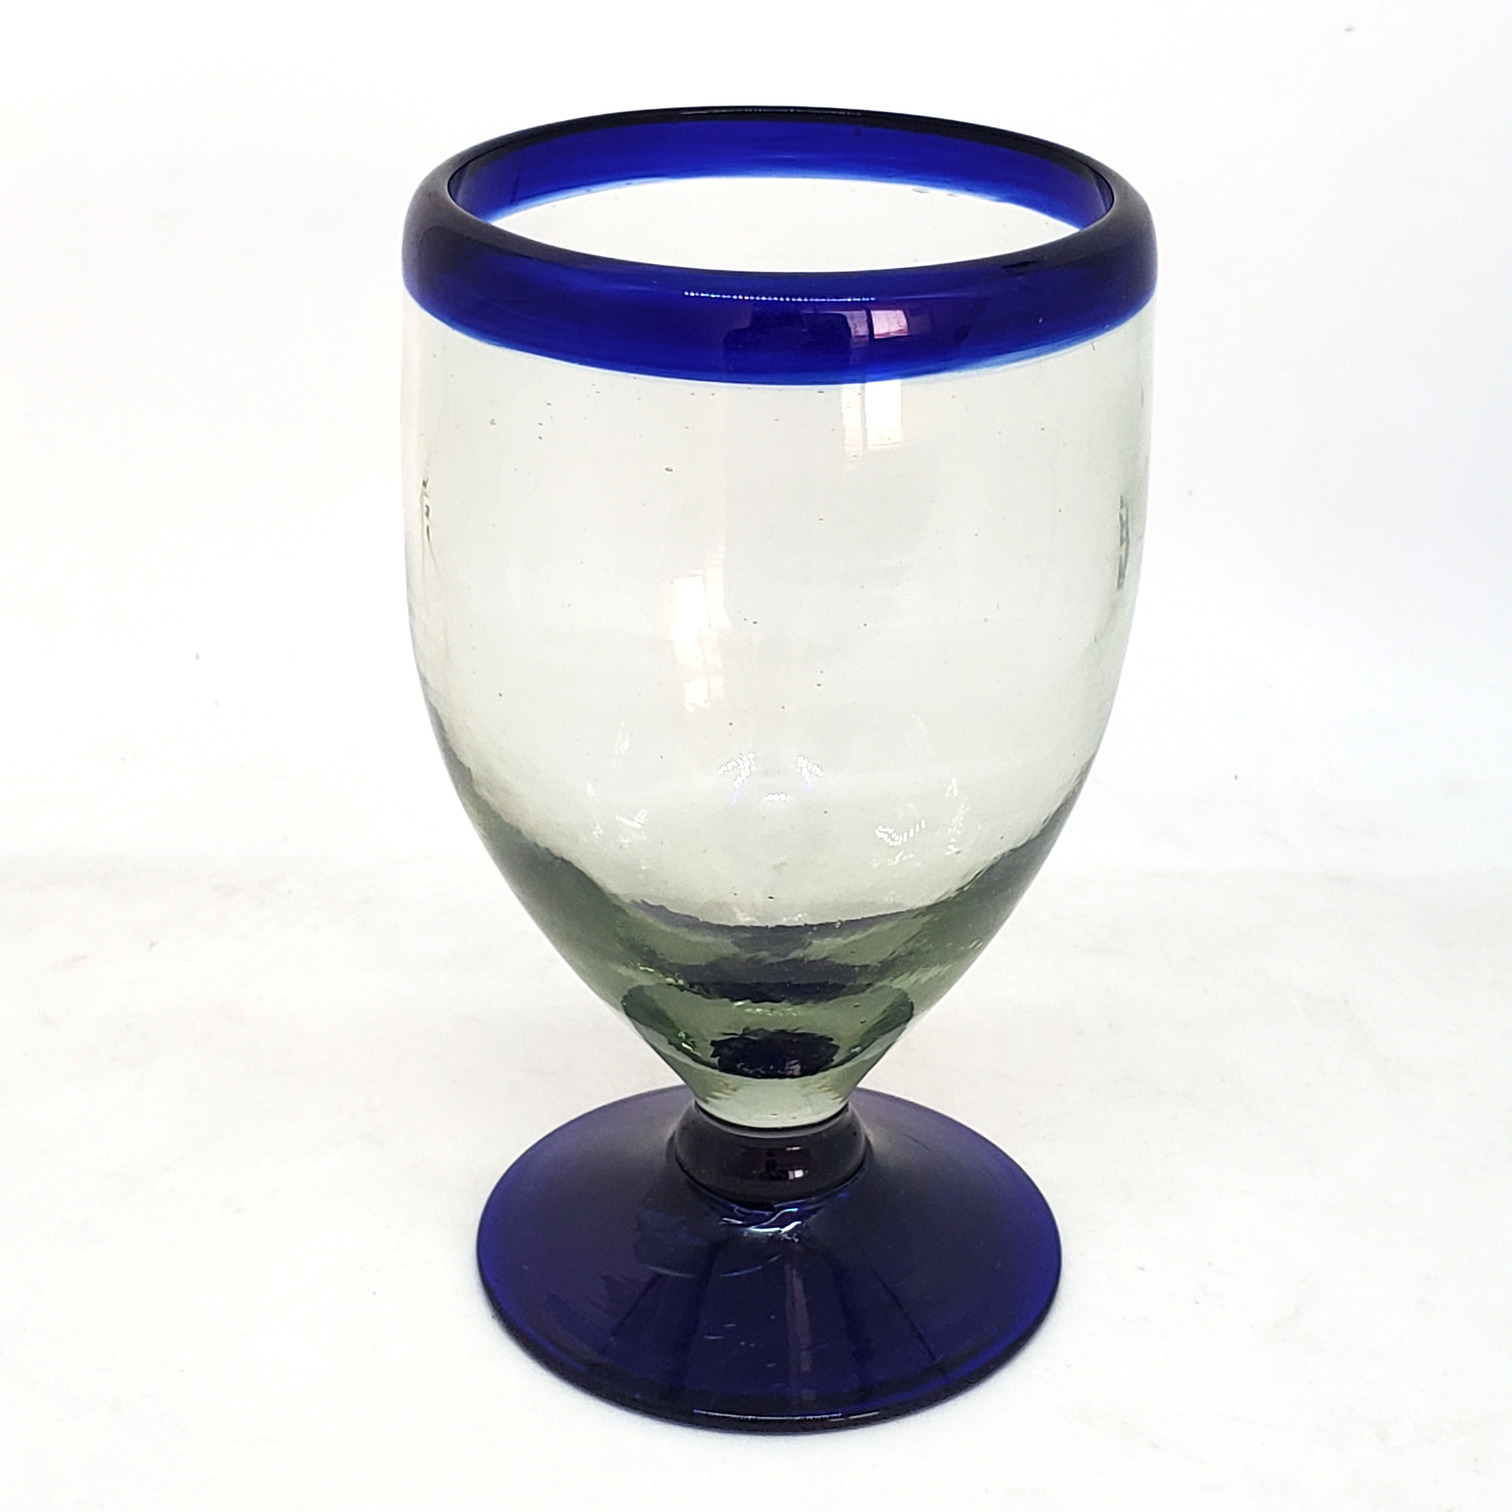 Wholesale Colored Rim Glassware / Cobalt Blue Rim 12 oz Short Stem Wine Glasses  / Add sophistication to your table with these short stem all-purpose wine glasses. Each bordered with a beautiful blue rim.